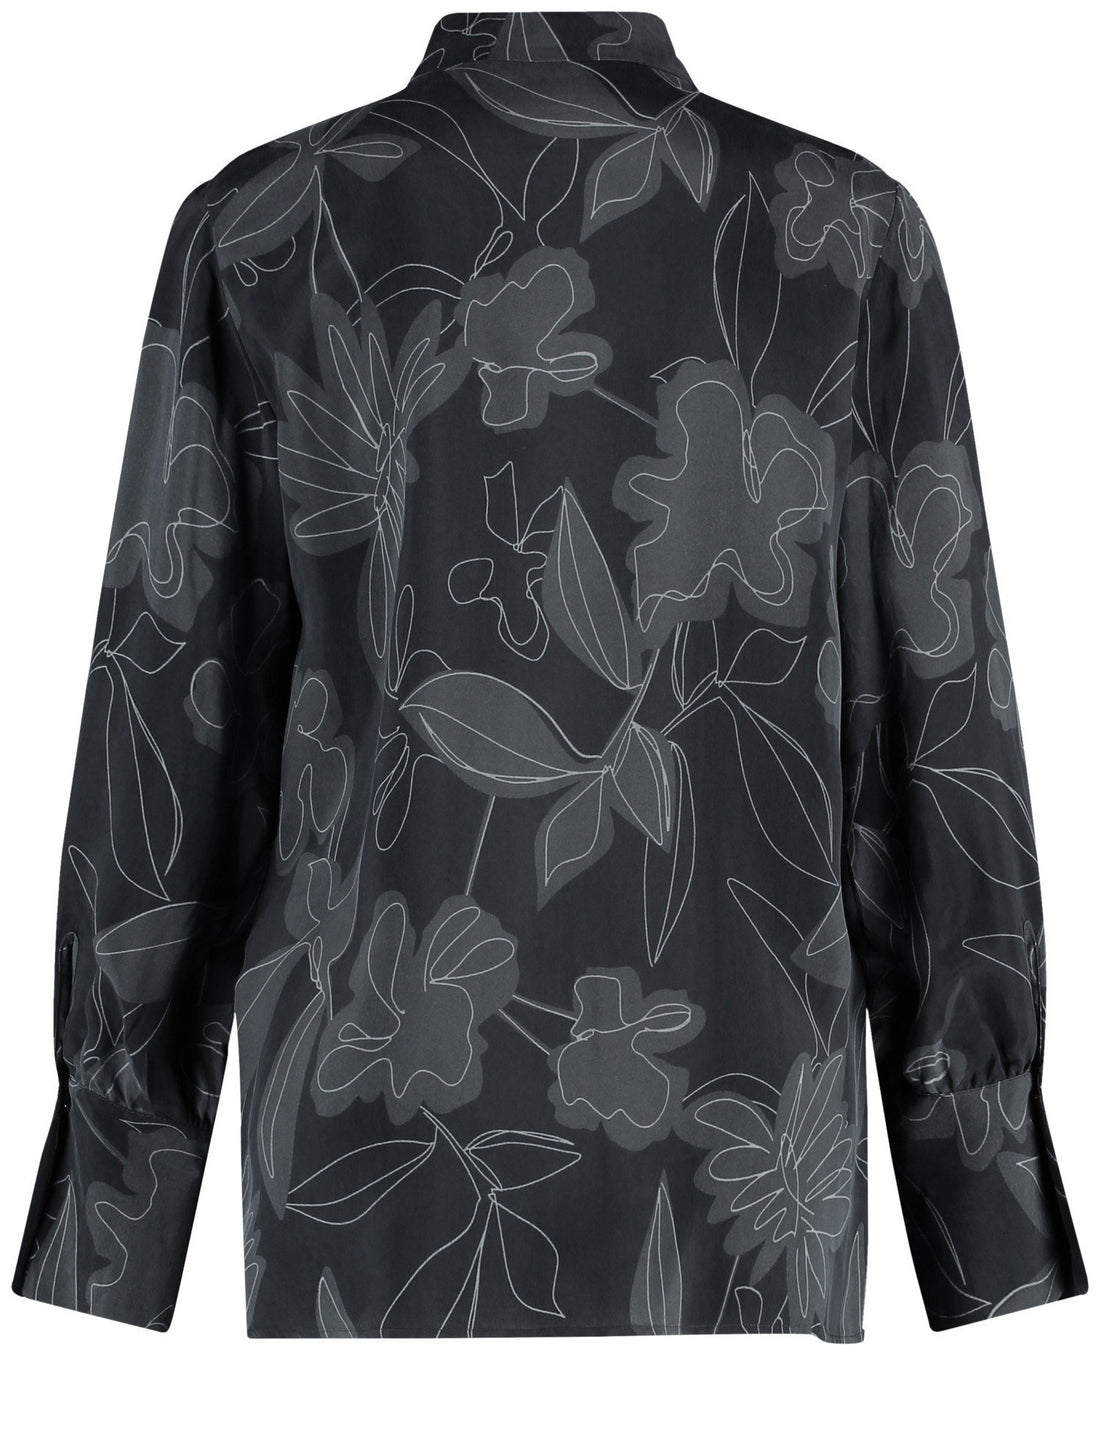 Long Sleeve Blouse With A Floral Pattern And Hem Slits_160062-66452_1039_02